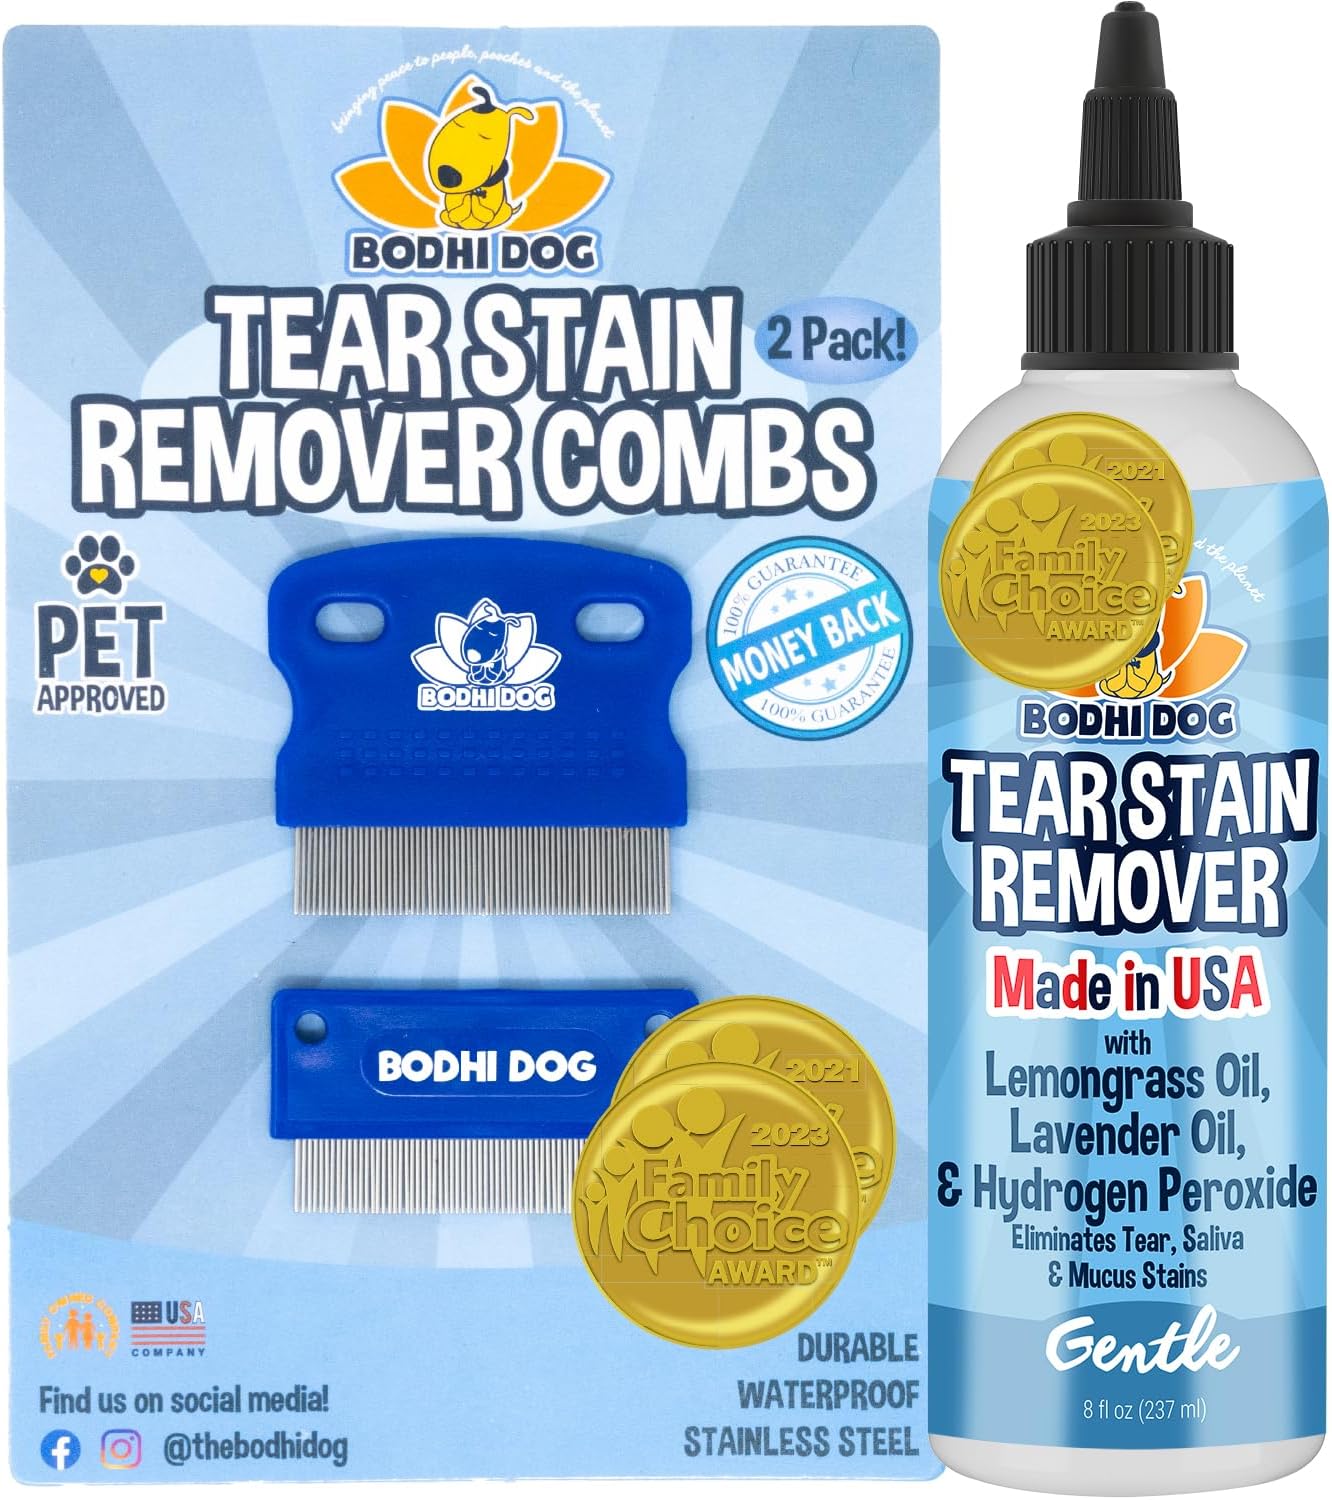 Bodhi Dog Tear Eye Combs | Removes Stains for Dogs and Cats | Clean and Remove Crust, Dirt, Buildup around Pet Eyes | Safe & Gentle on Delicate Fur | (Tear Eye Combs Bundle, Set of Two)